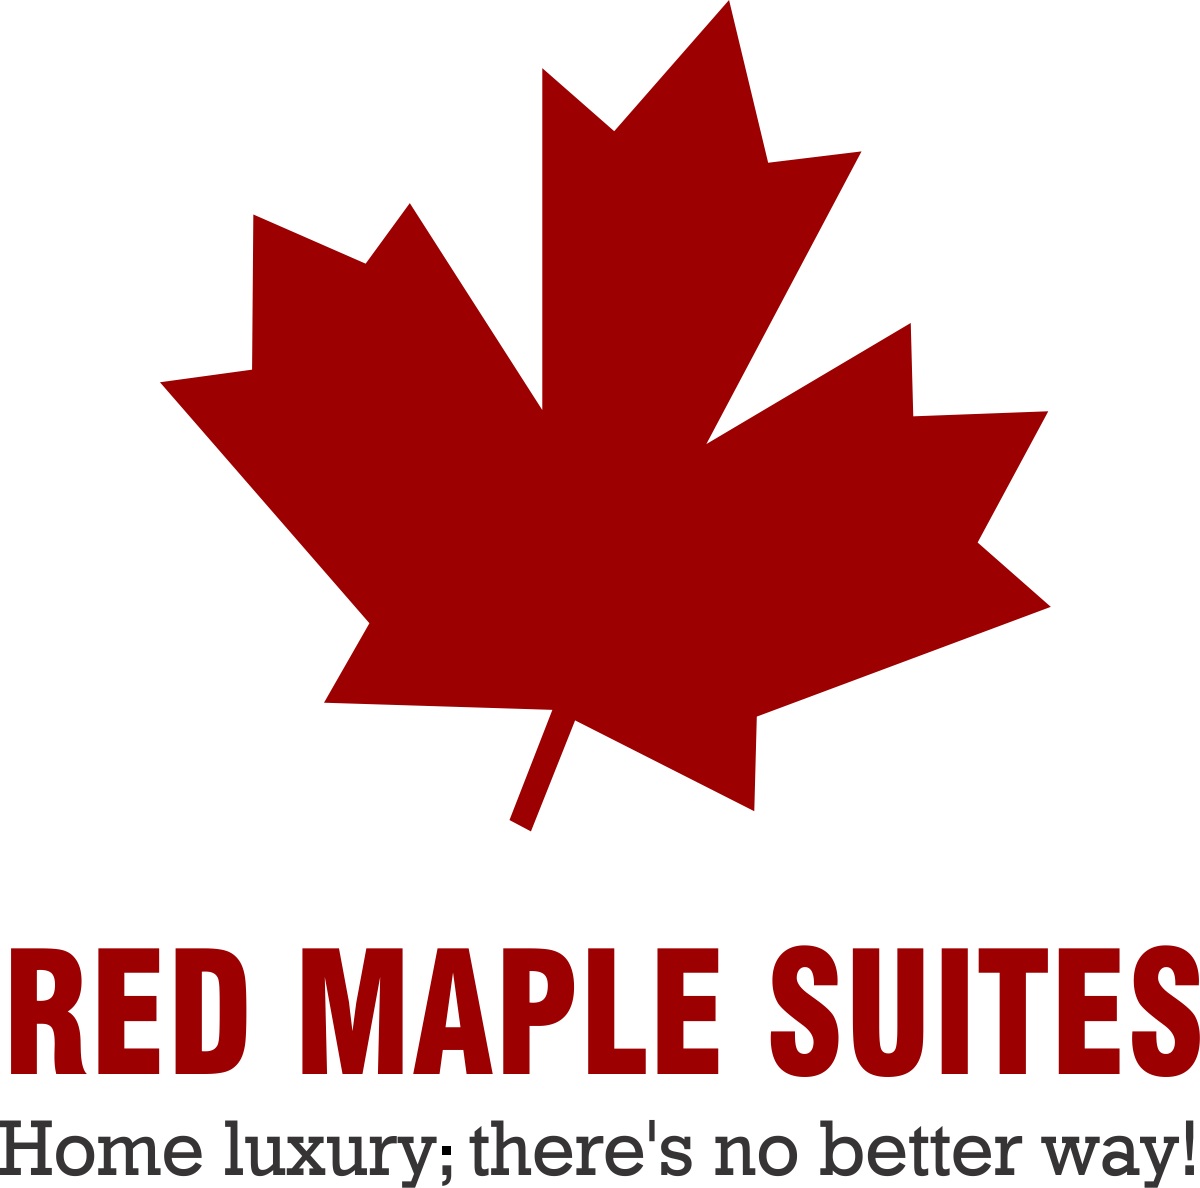 Red Maple Leaf Logo - Our Suites. Red Maple Suites